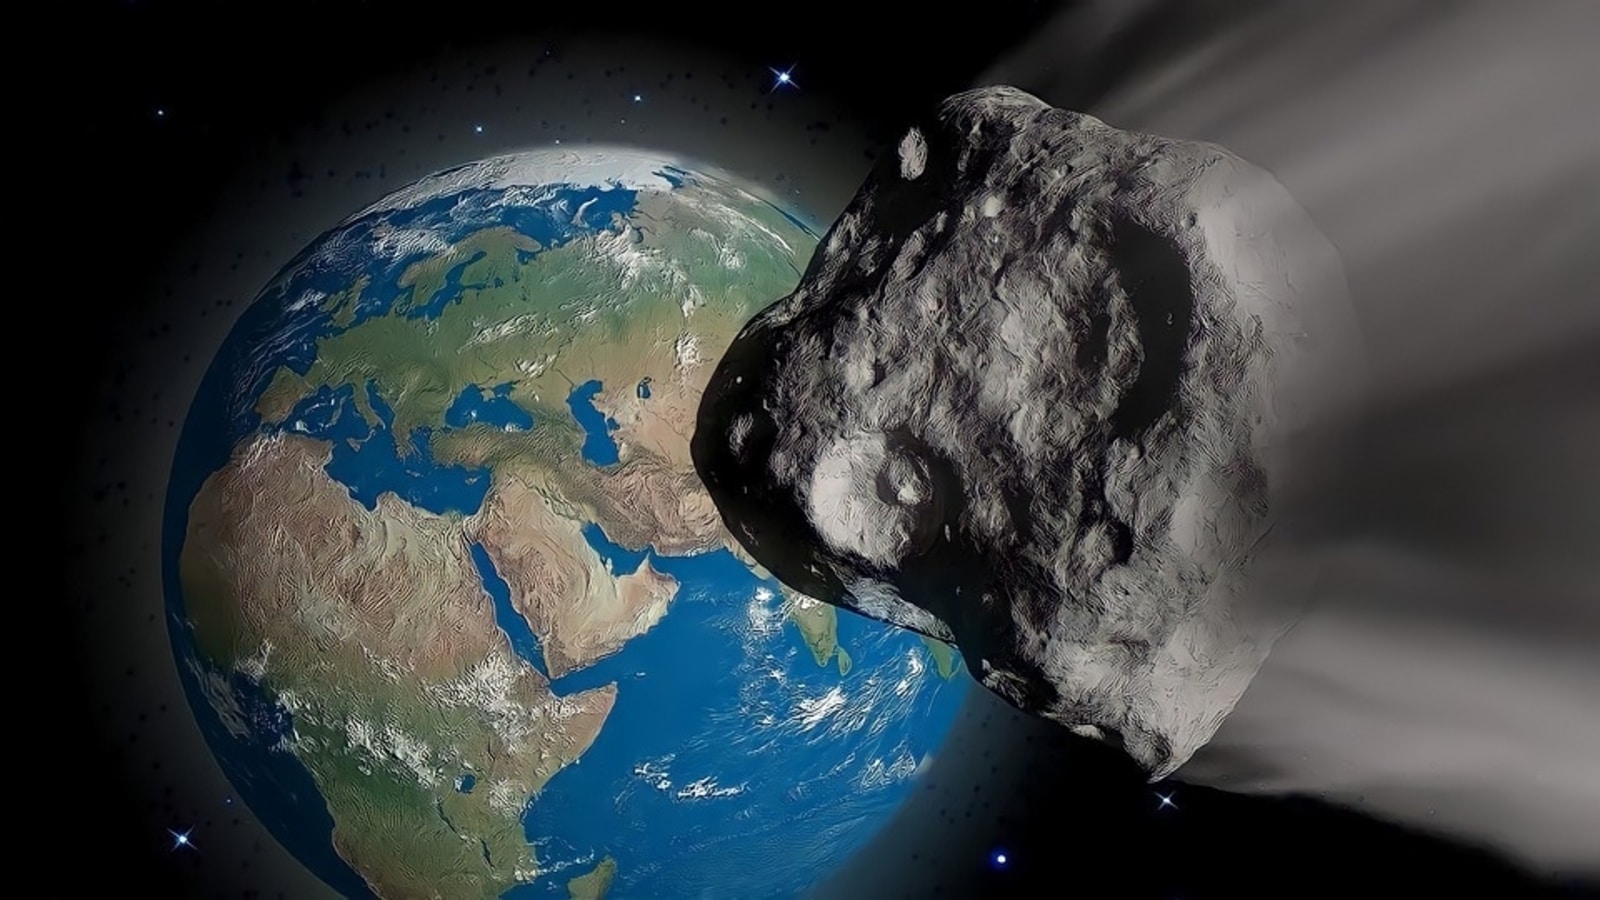 large asteroid touching earth